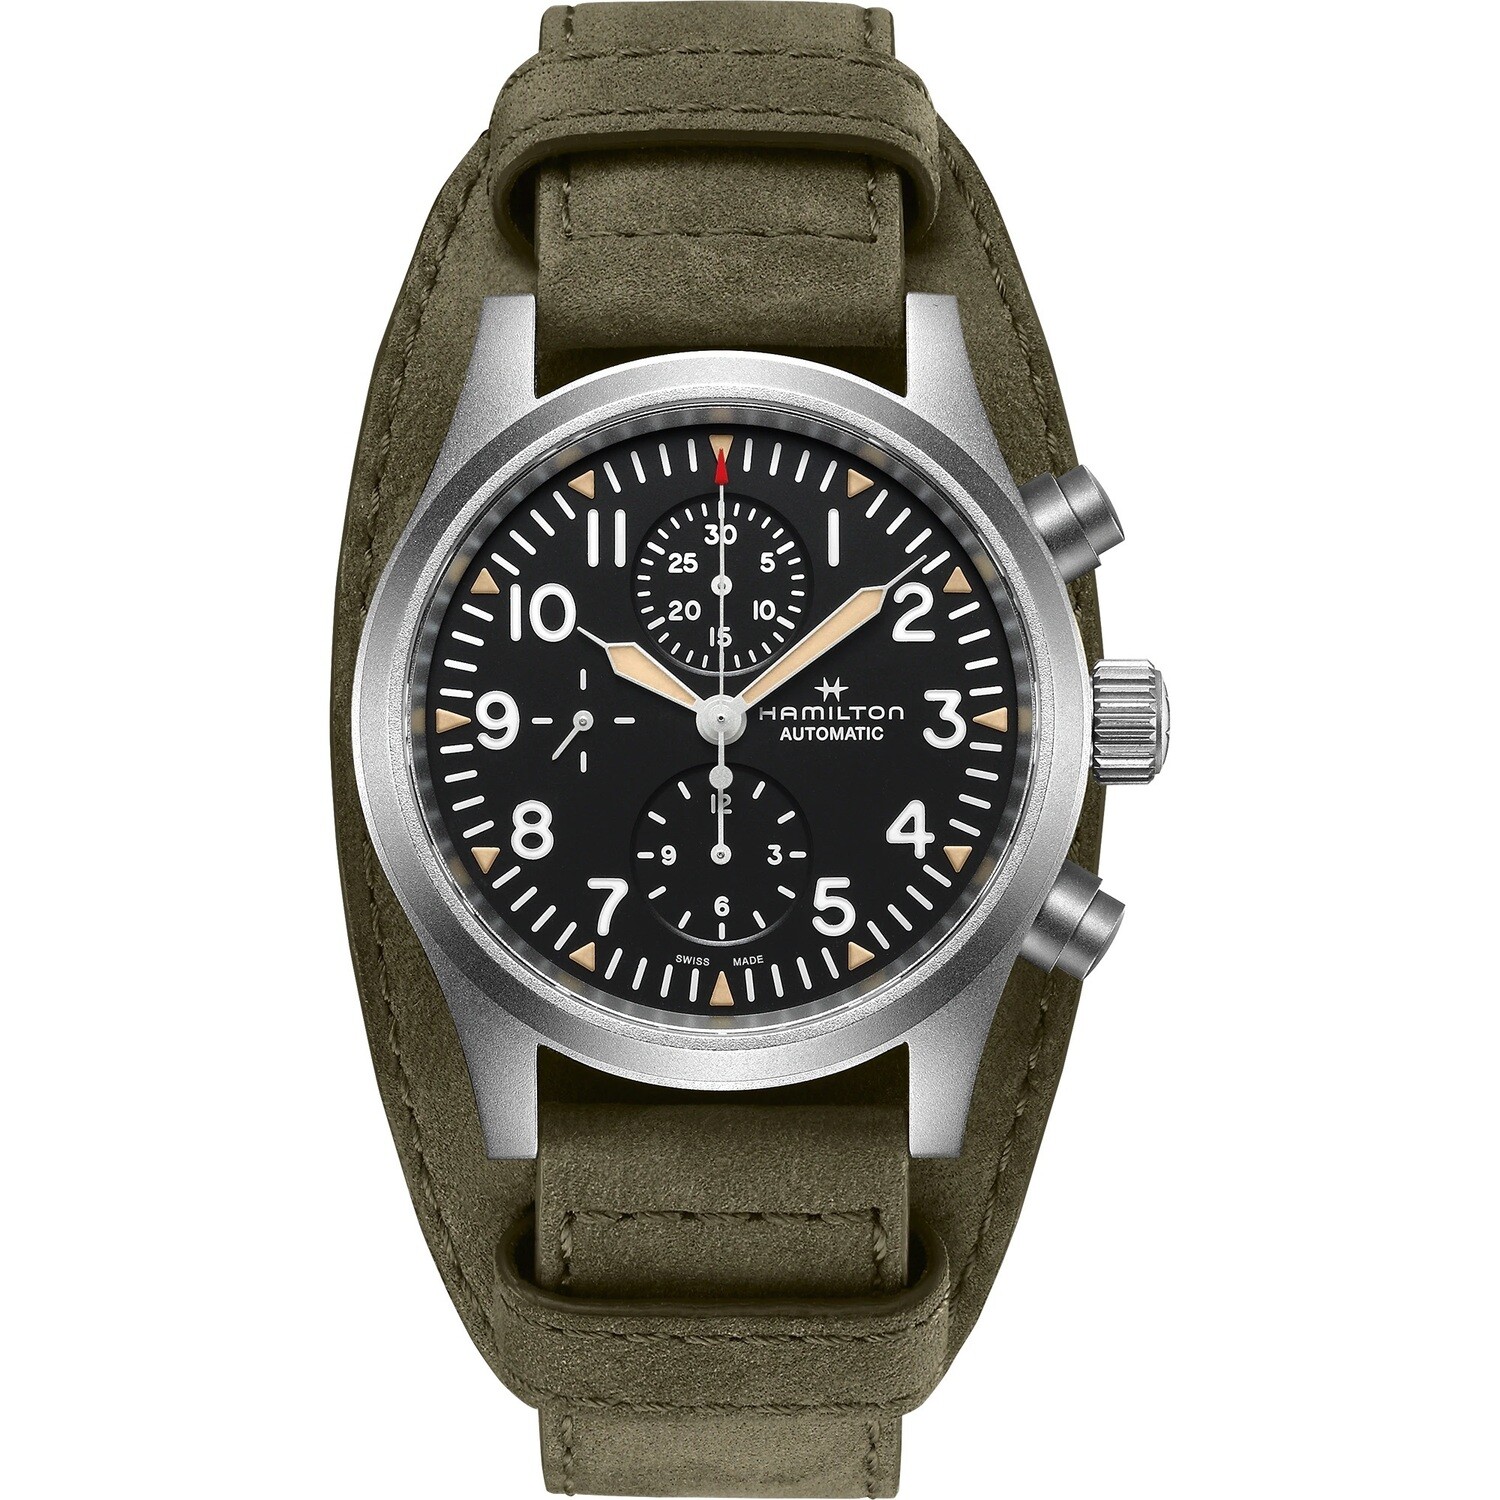 Khaki Field automatic chronograph H71706830 automatic men's watch 44mm 60h Power Reserve leather band Sapphire glass 100m Water resist




Rugged, tough and accurate, the Khaki Field automatic chronograph is the perfect timepiece for confident explor